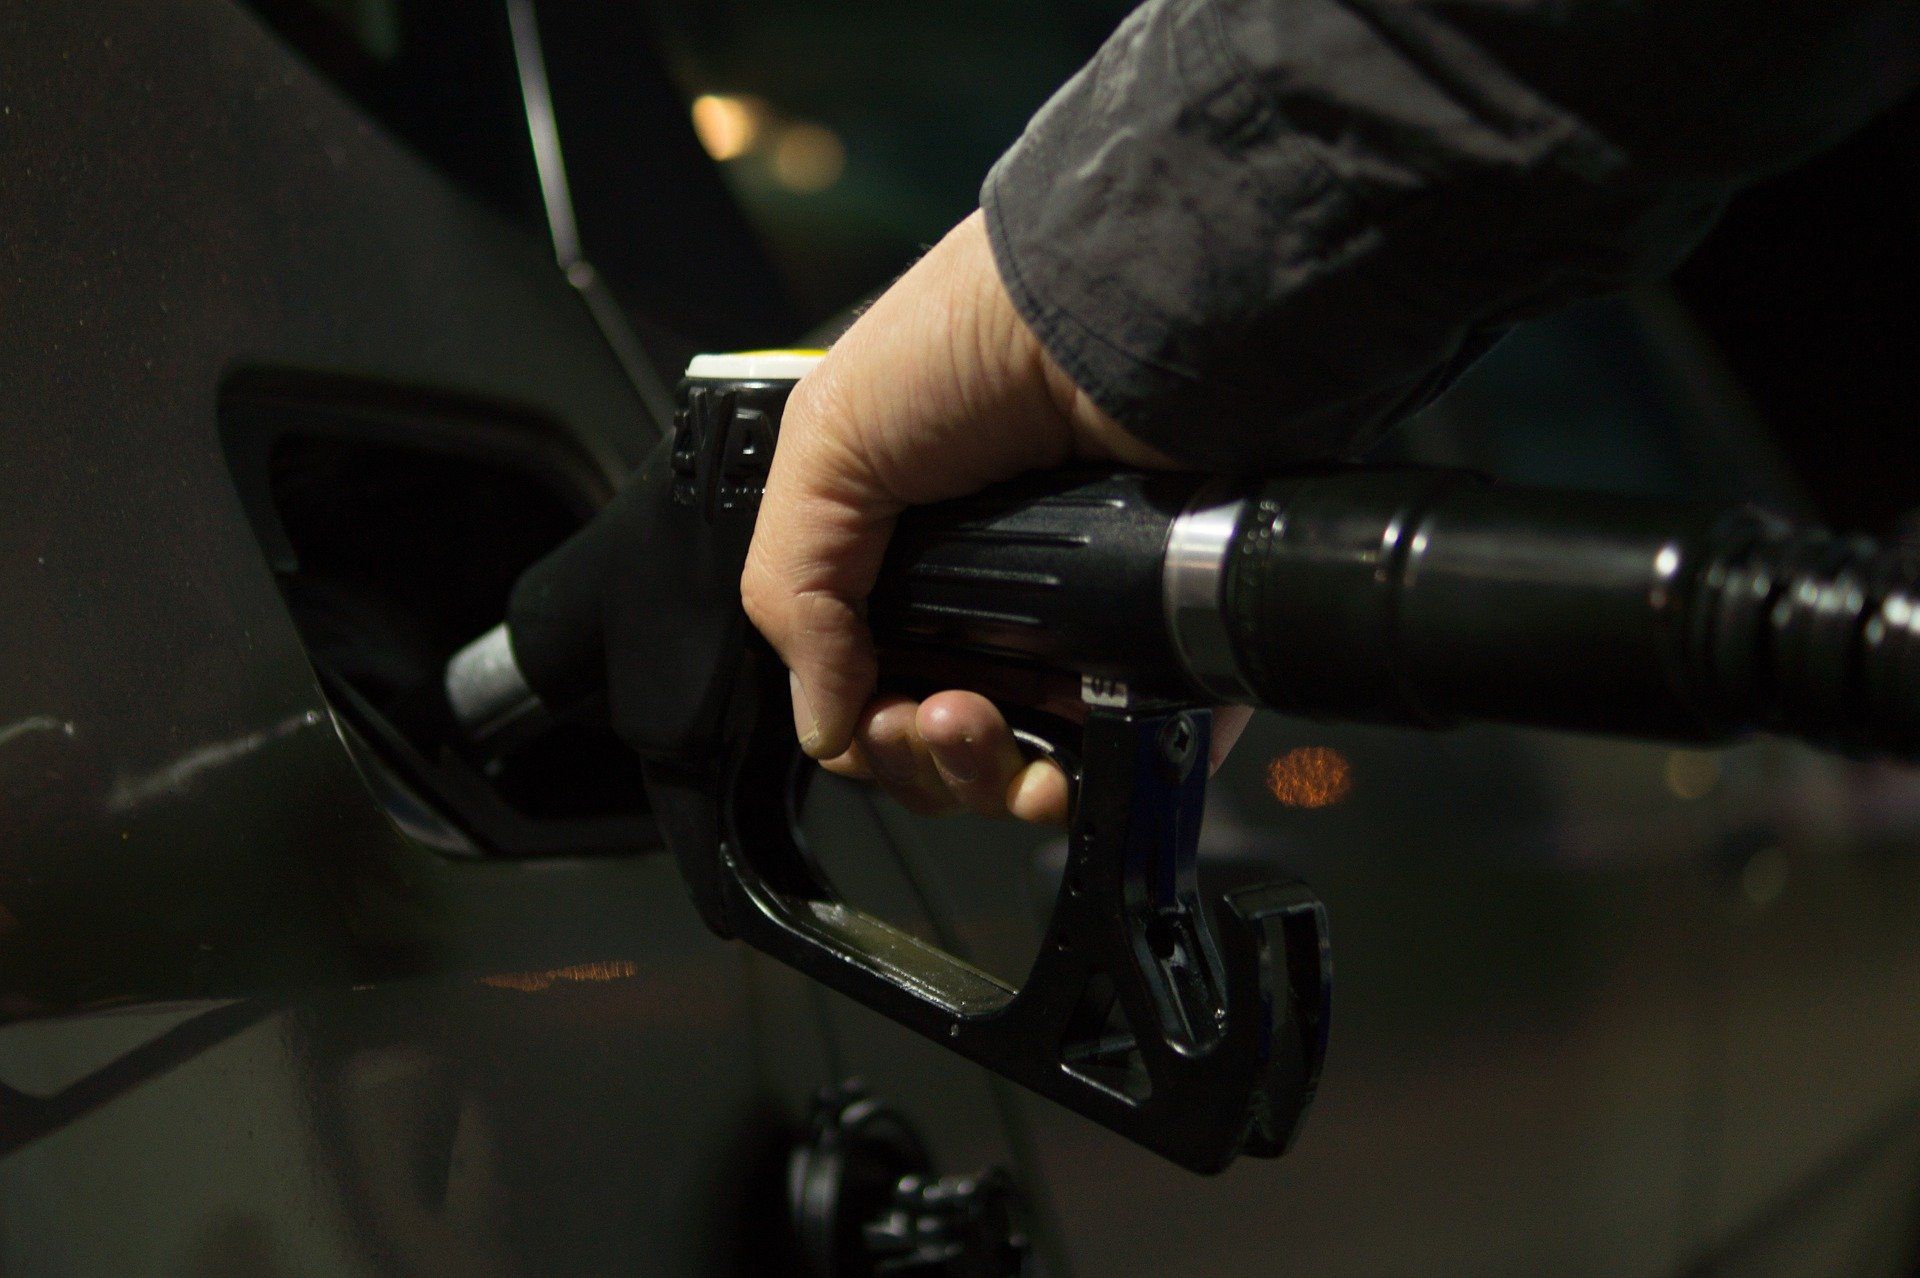 Fuel prices: Petrol priced at Rs 95.41, diesel Rs 86.67 in Delhi on January 27, 2022